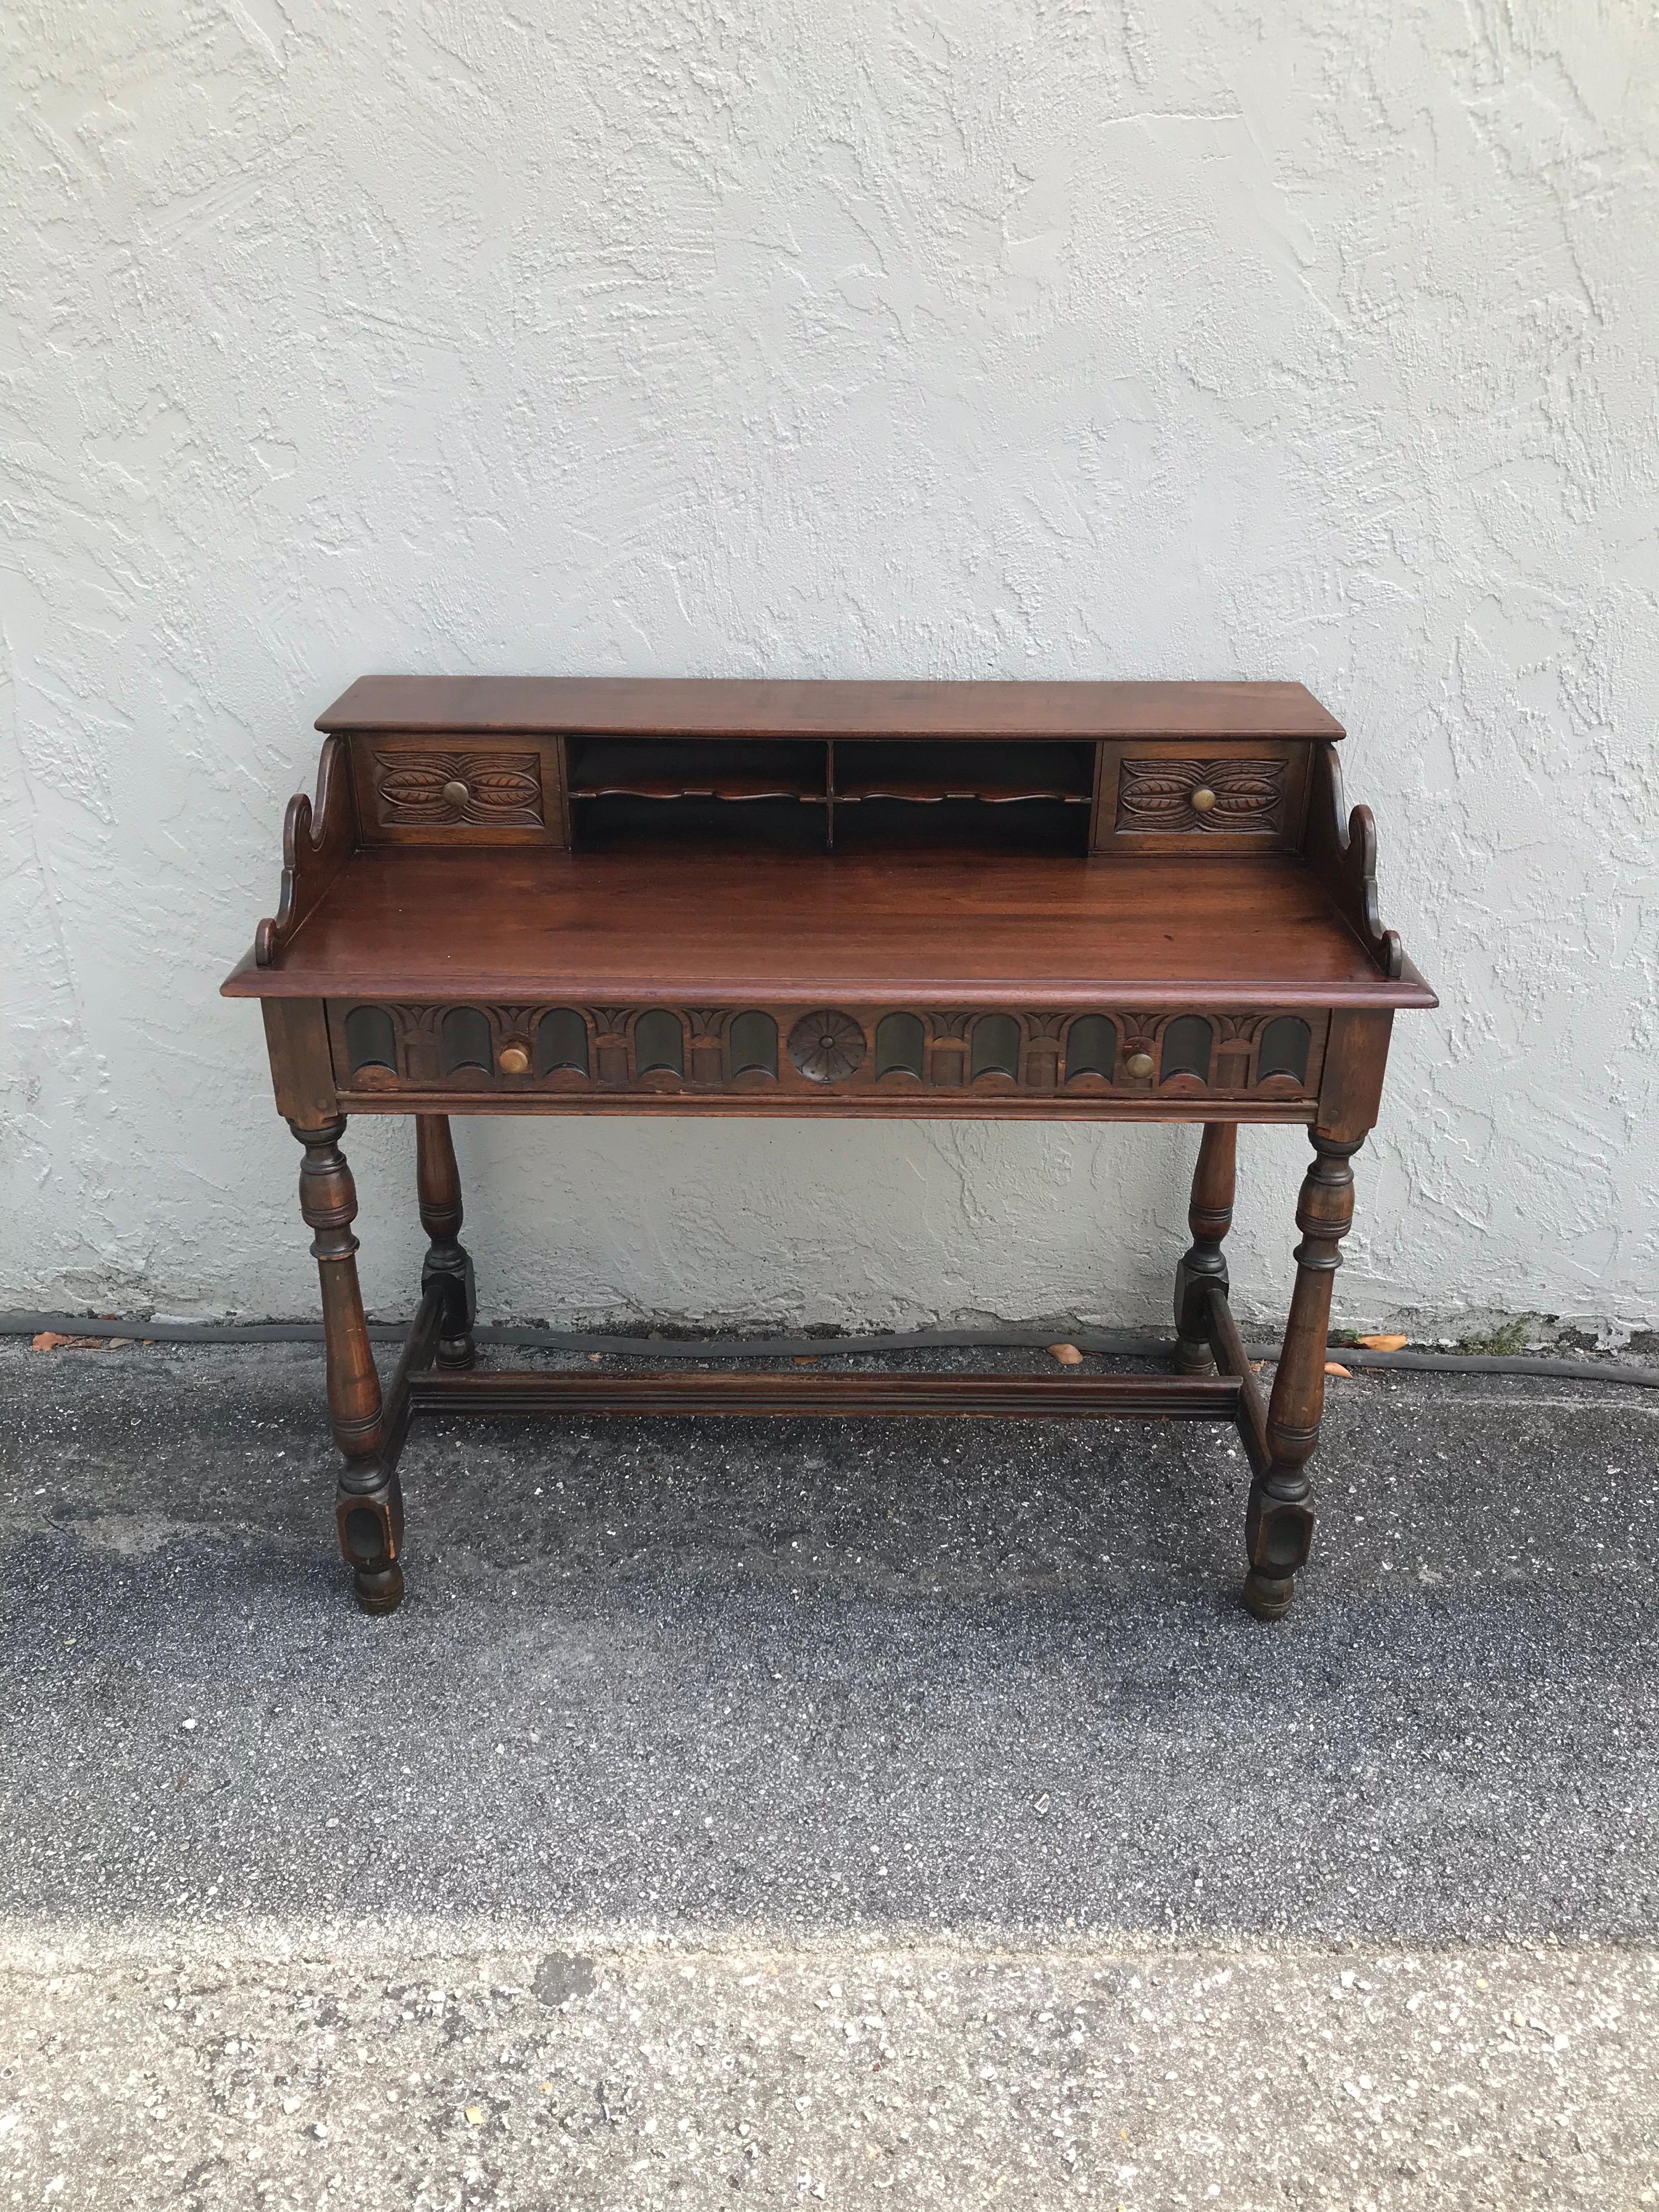 Unique arts & crafts style desk with multiple drawers & compartments. Beautiful carved details on drawer fronts.